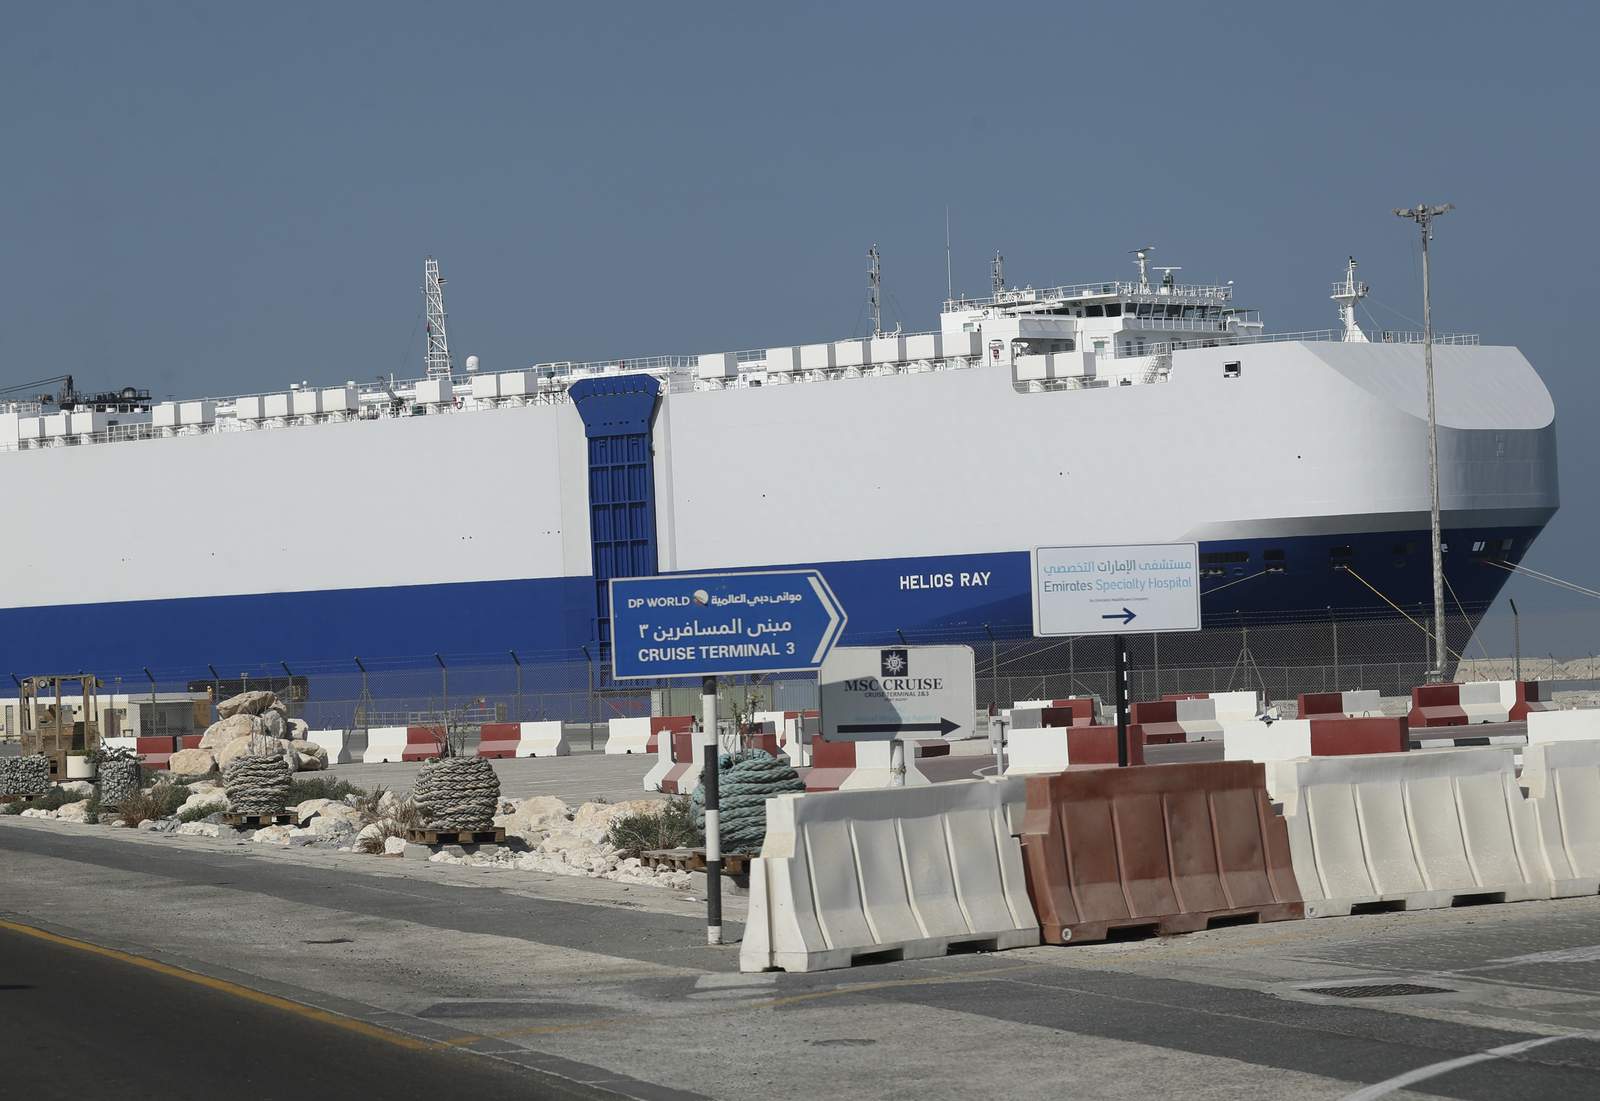 Israeli-owned ship docked in Dubai after mysterious blast